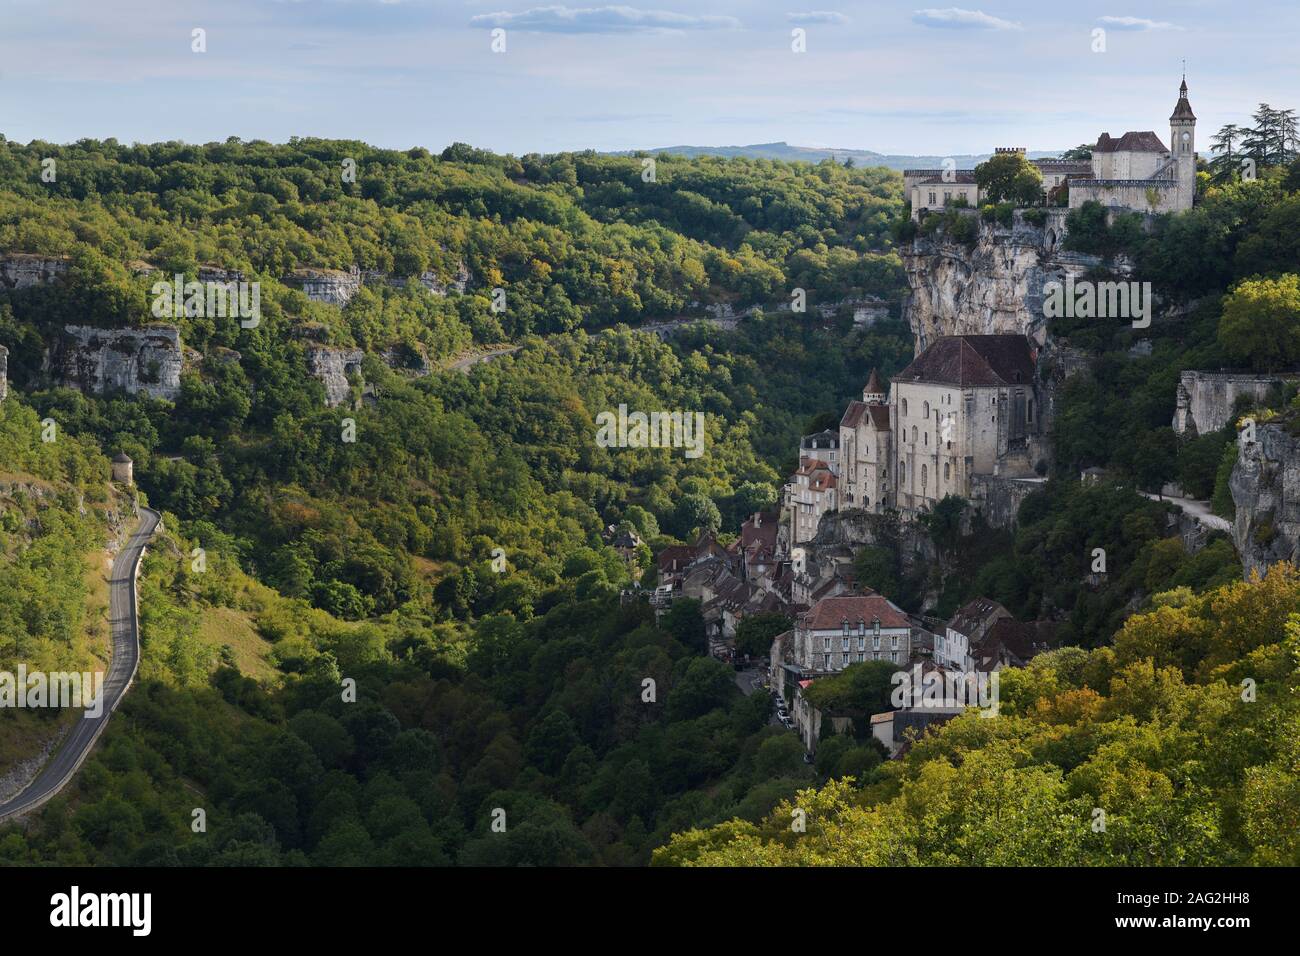 Rocamadour, Medieval French town built into a side of a cliff in Lot, Southwestern France. Rocamador, daytime landscape scenery. South of France trave Stock Photo